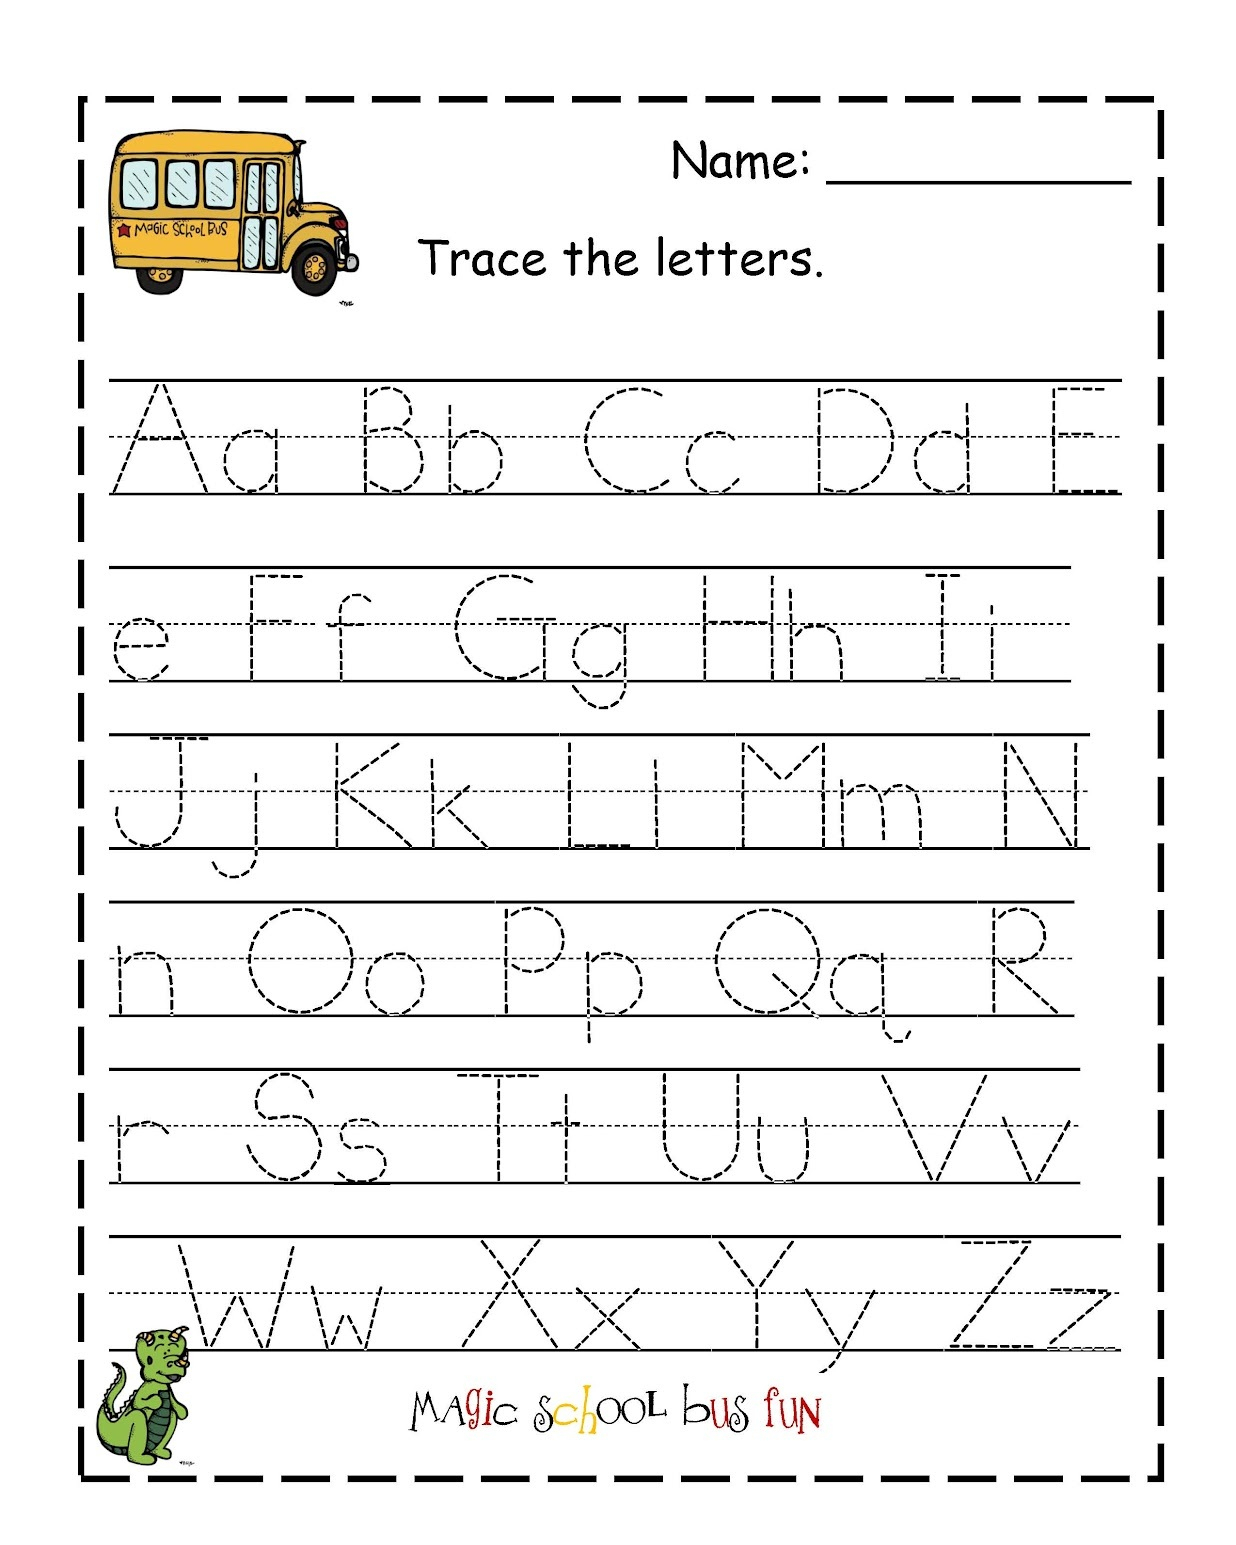 Traceable Letter Worksheets To Print | Activity Shelter with regard to Alphabet Worksheets Printable